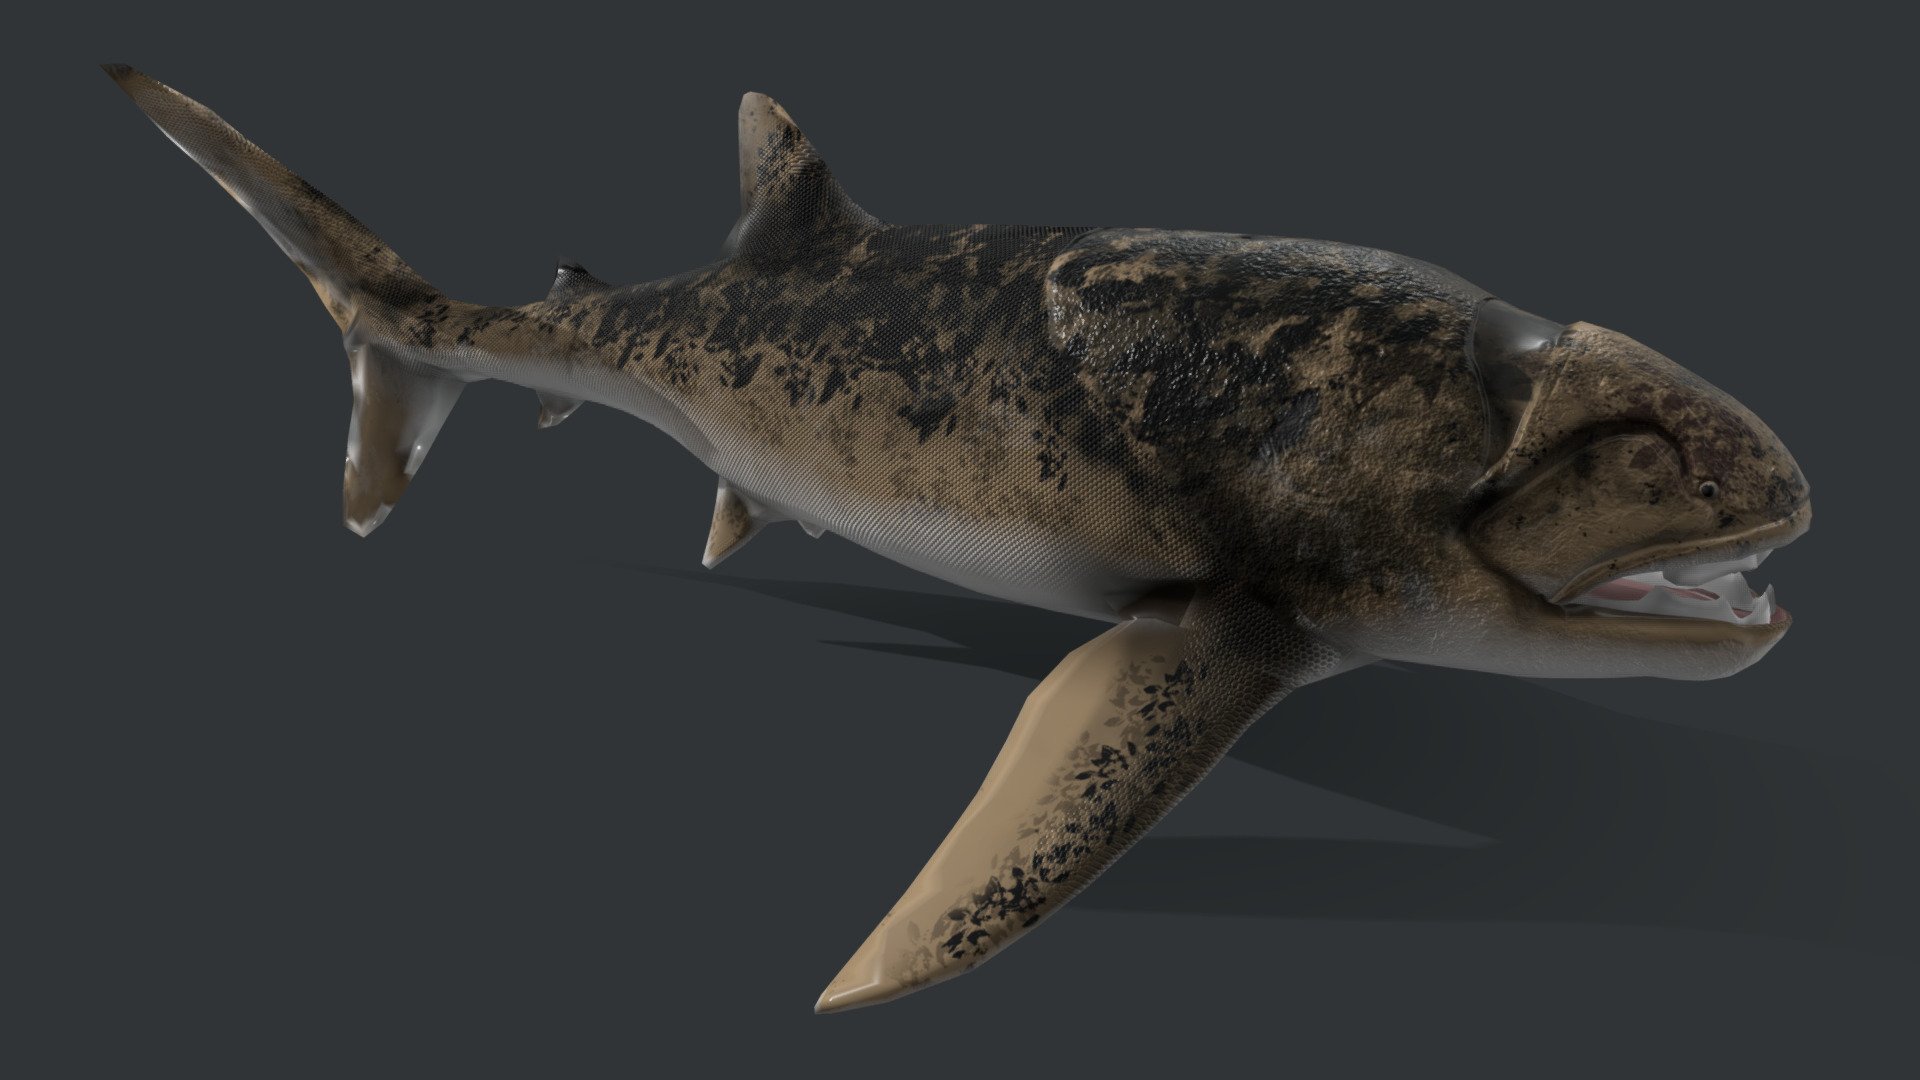 I'm remaking the whole model to give it a more shark like body, the proportions are based on the whale shark.

Dunkleosteus is an extinct genus of large armored, jawed fishes that existed during the Late Devonian period, about 358–382 million years ago 3d model